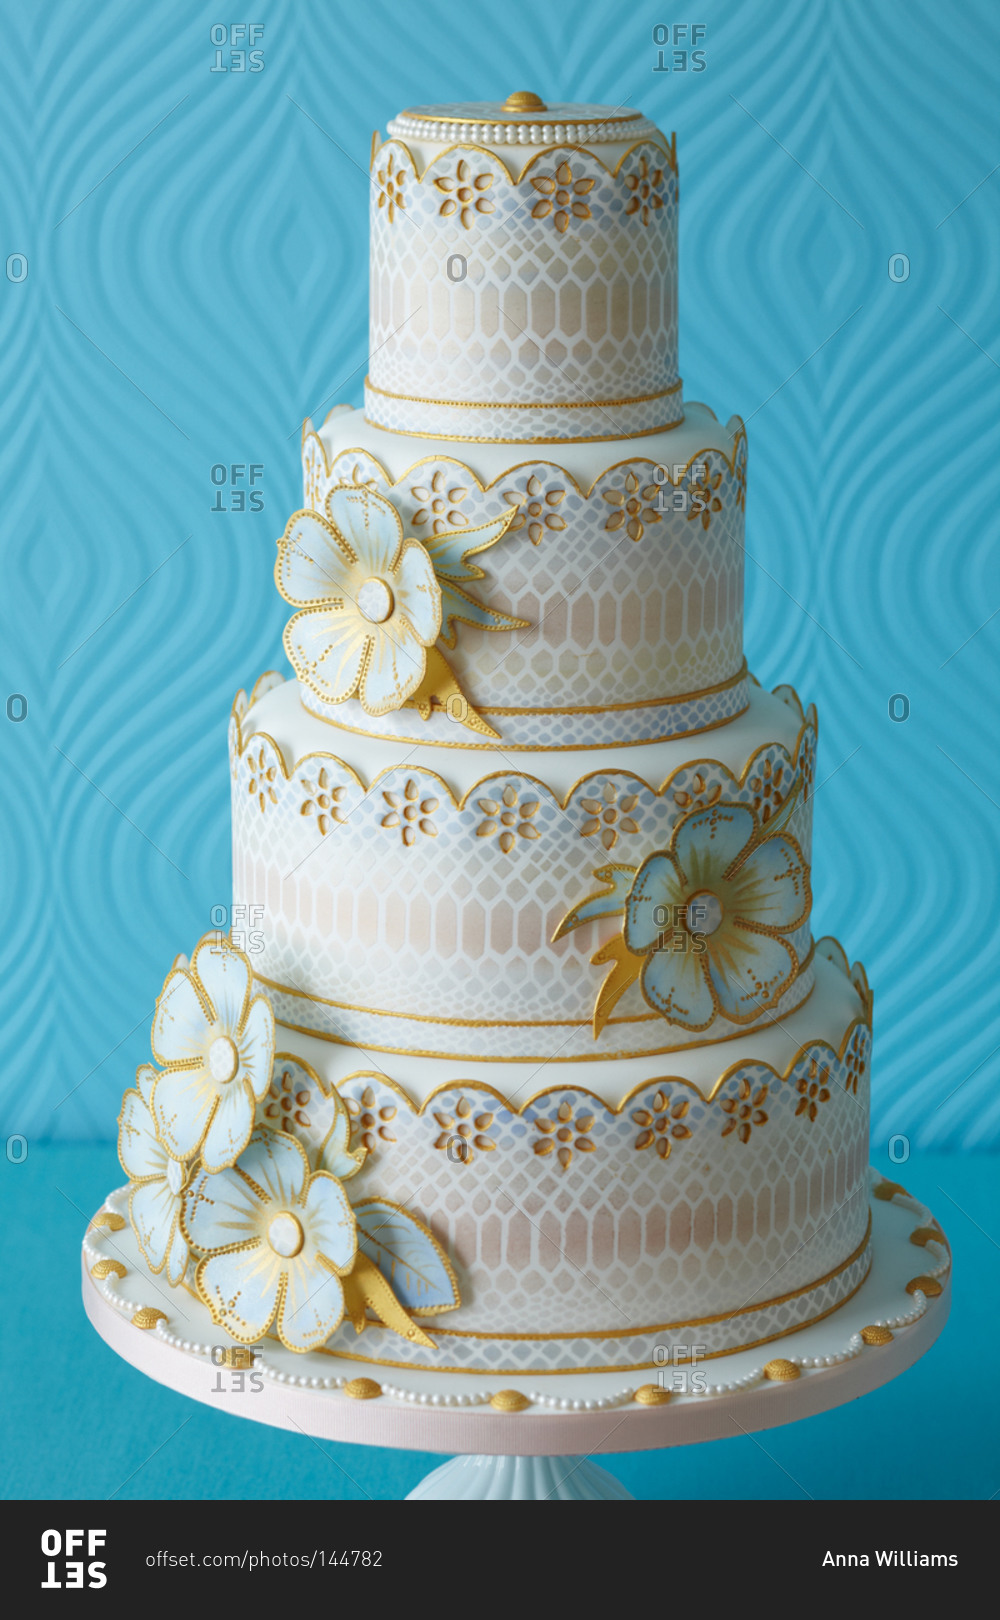 Flowers outlined in gold decorate a four-tiered cake